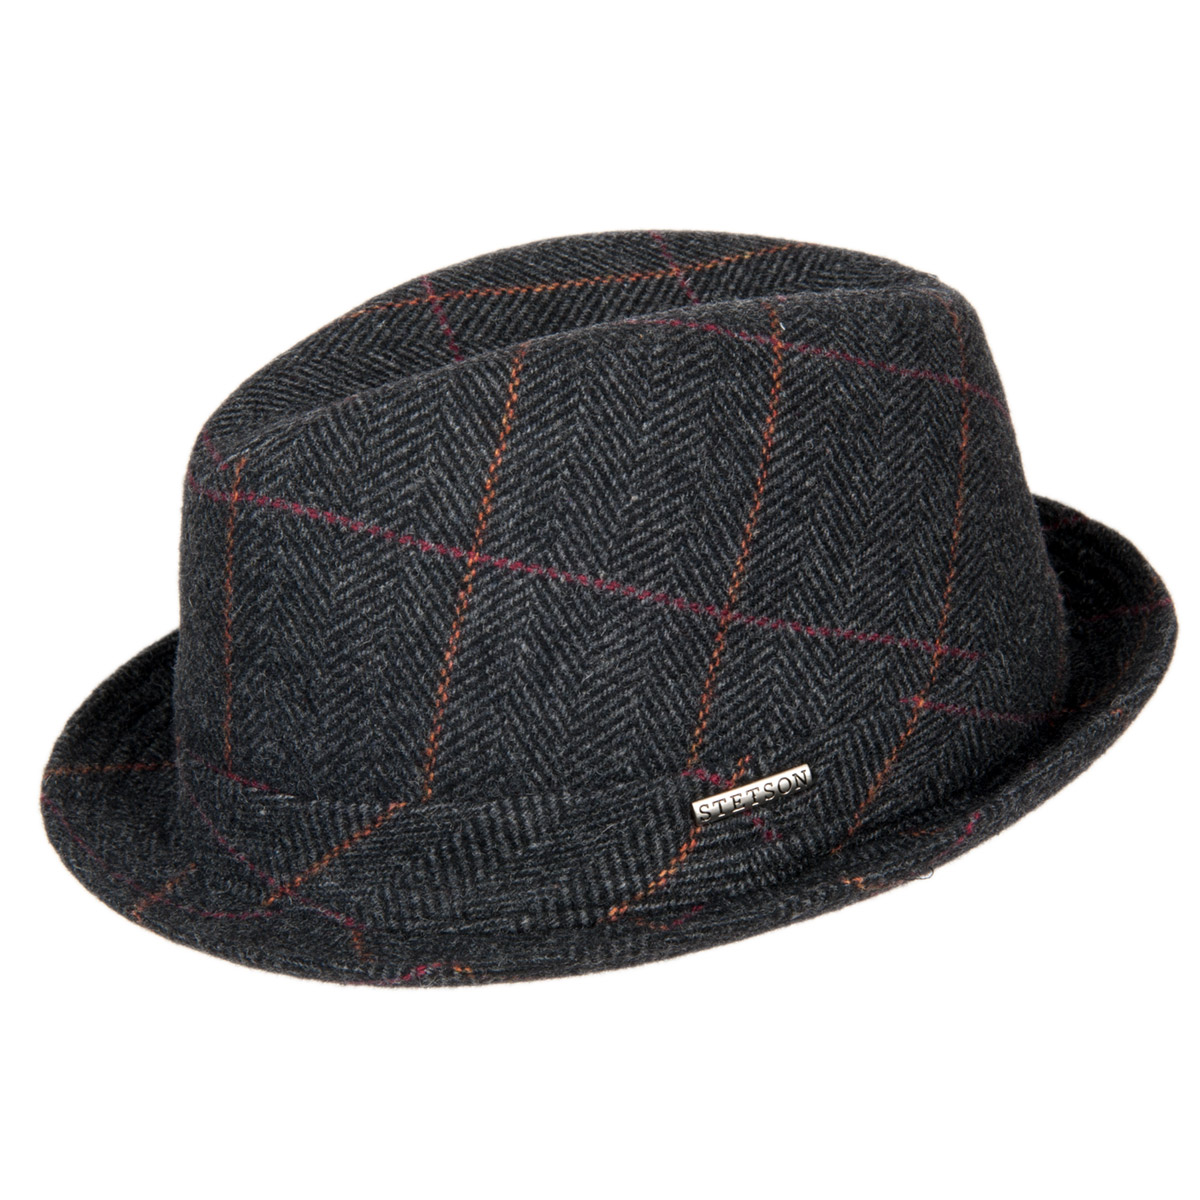 Lined Mens Wool Trilby Hat By Stetson